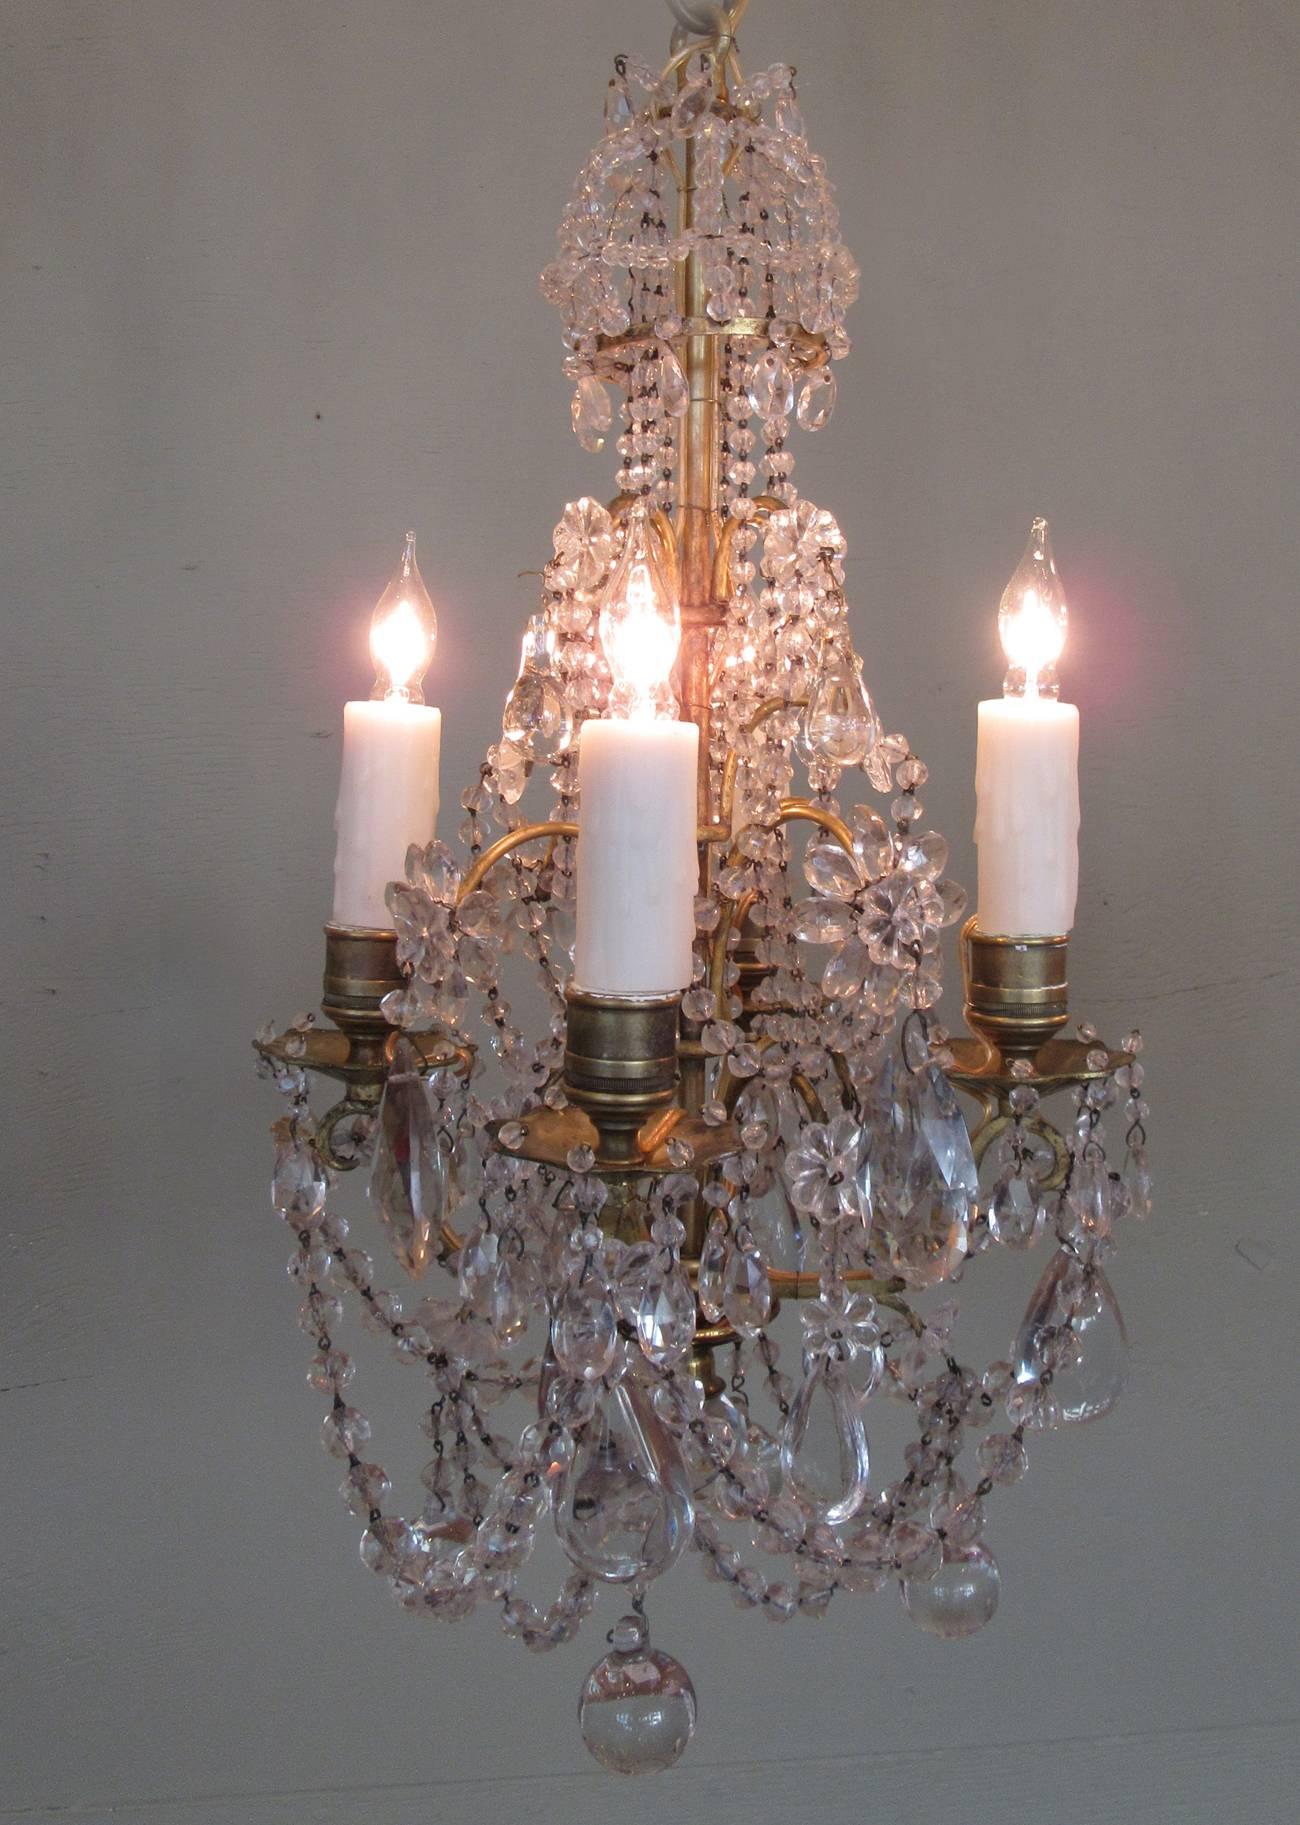 A diminutive early 19th century French Regence crystal and bronze chandelier, circa 1820, with four candle arms and adorned polished crystal pendants, beads and floral crystal accents. The chandelier has recently been cleaned and rewired with new